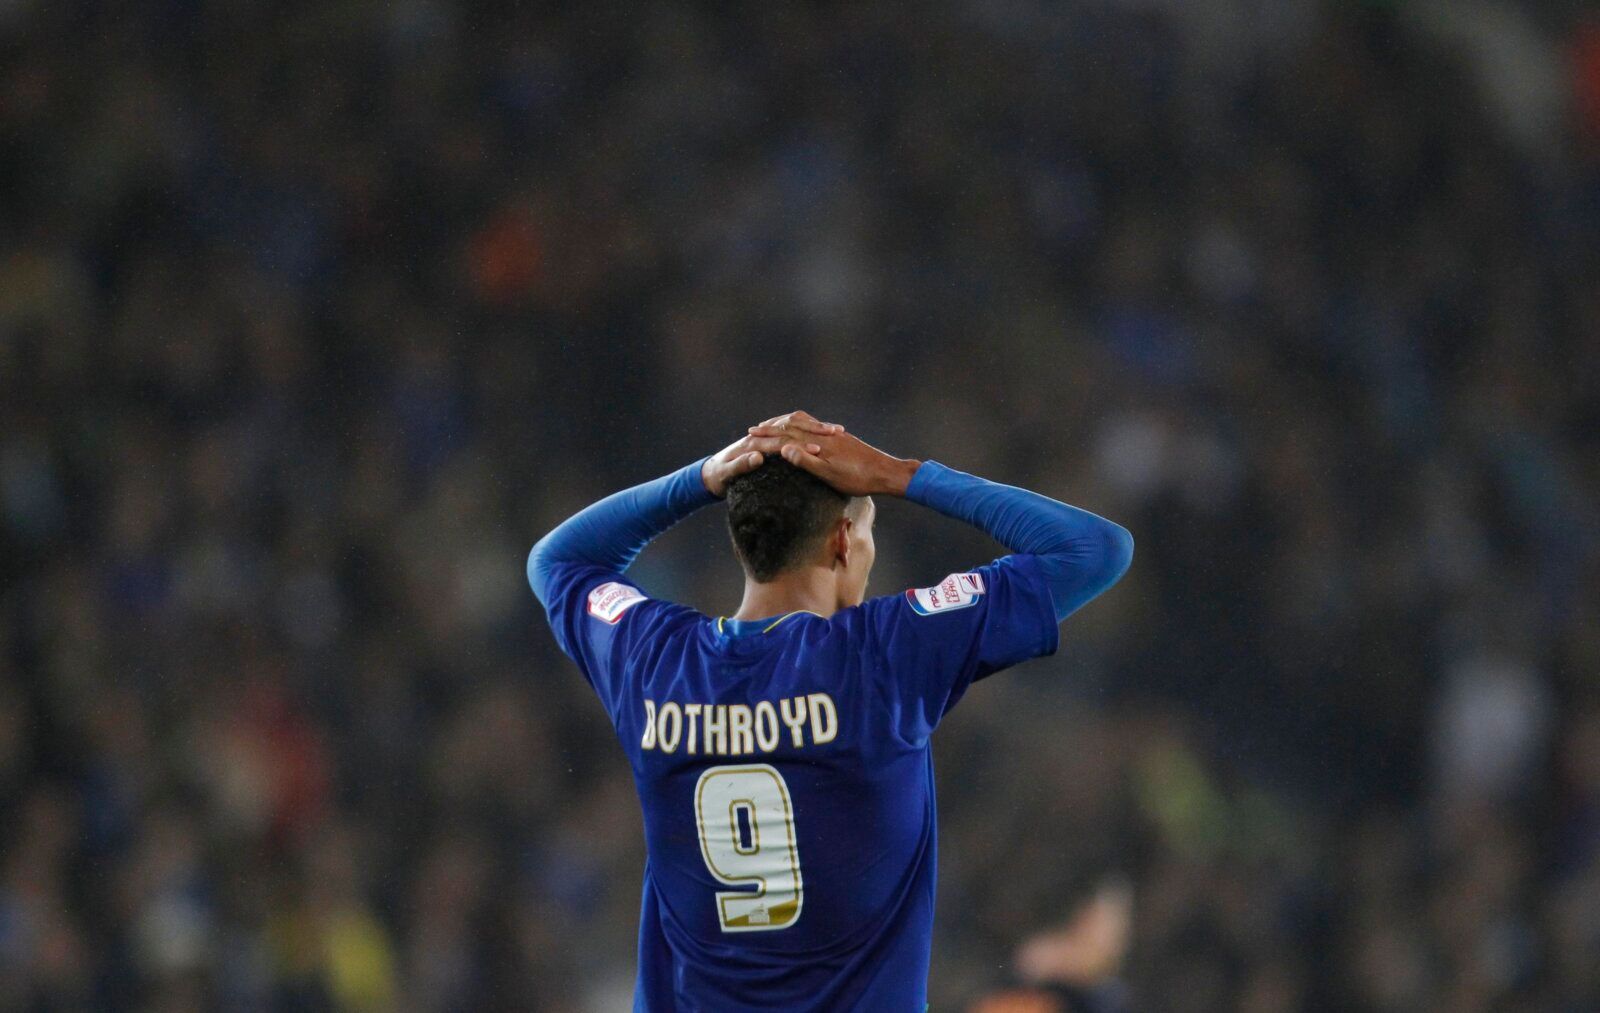 Football - Cardiff City v Reading npower Football League Championship Play-Off Semi Final Second Leg - Cardiff City Stadium - 10/11 - 17/5/11 
Cardiff's Jay Bothroyd looks dejected 
Mandatory Credit: Action Images / Paul Harding 
Livepic